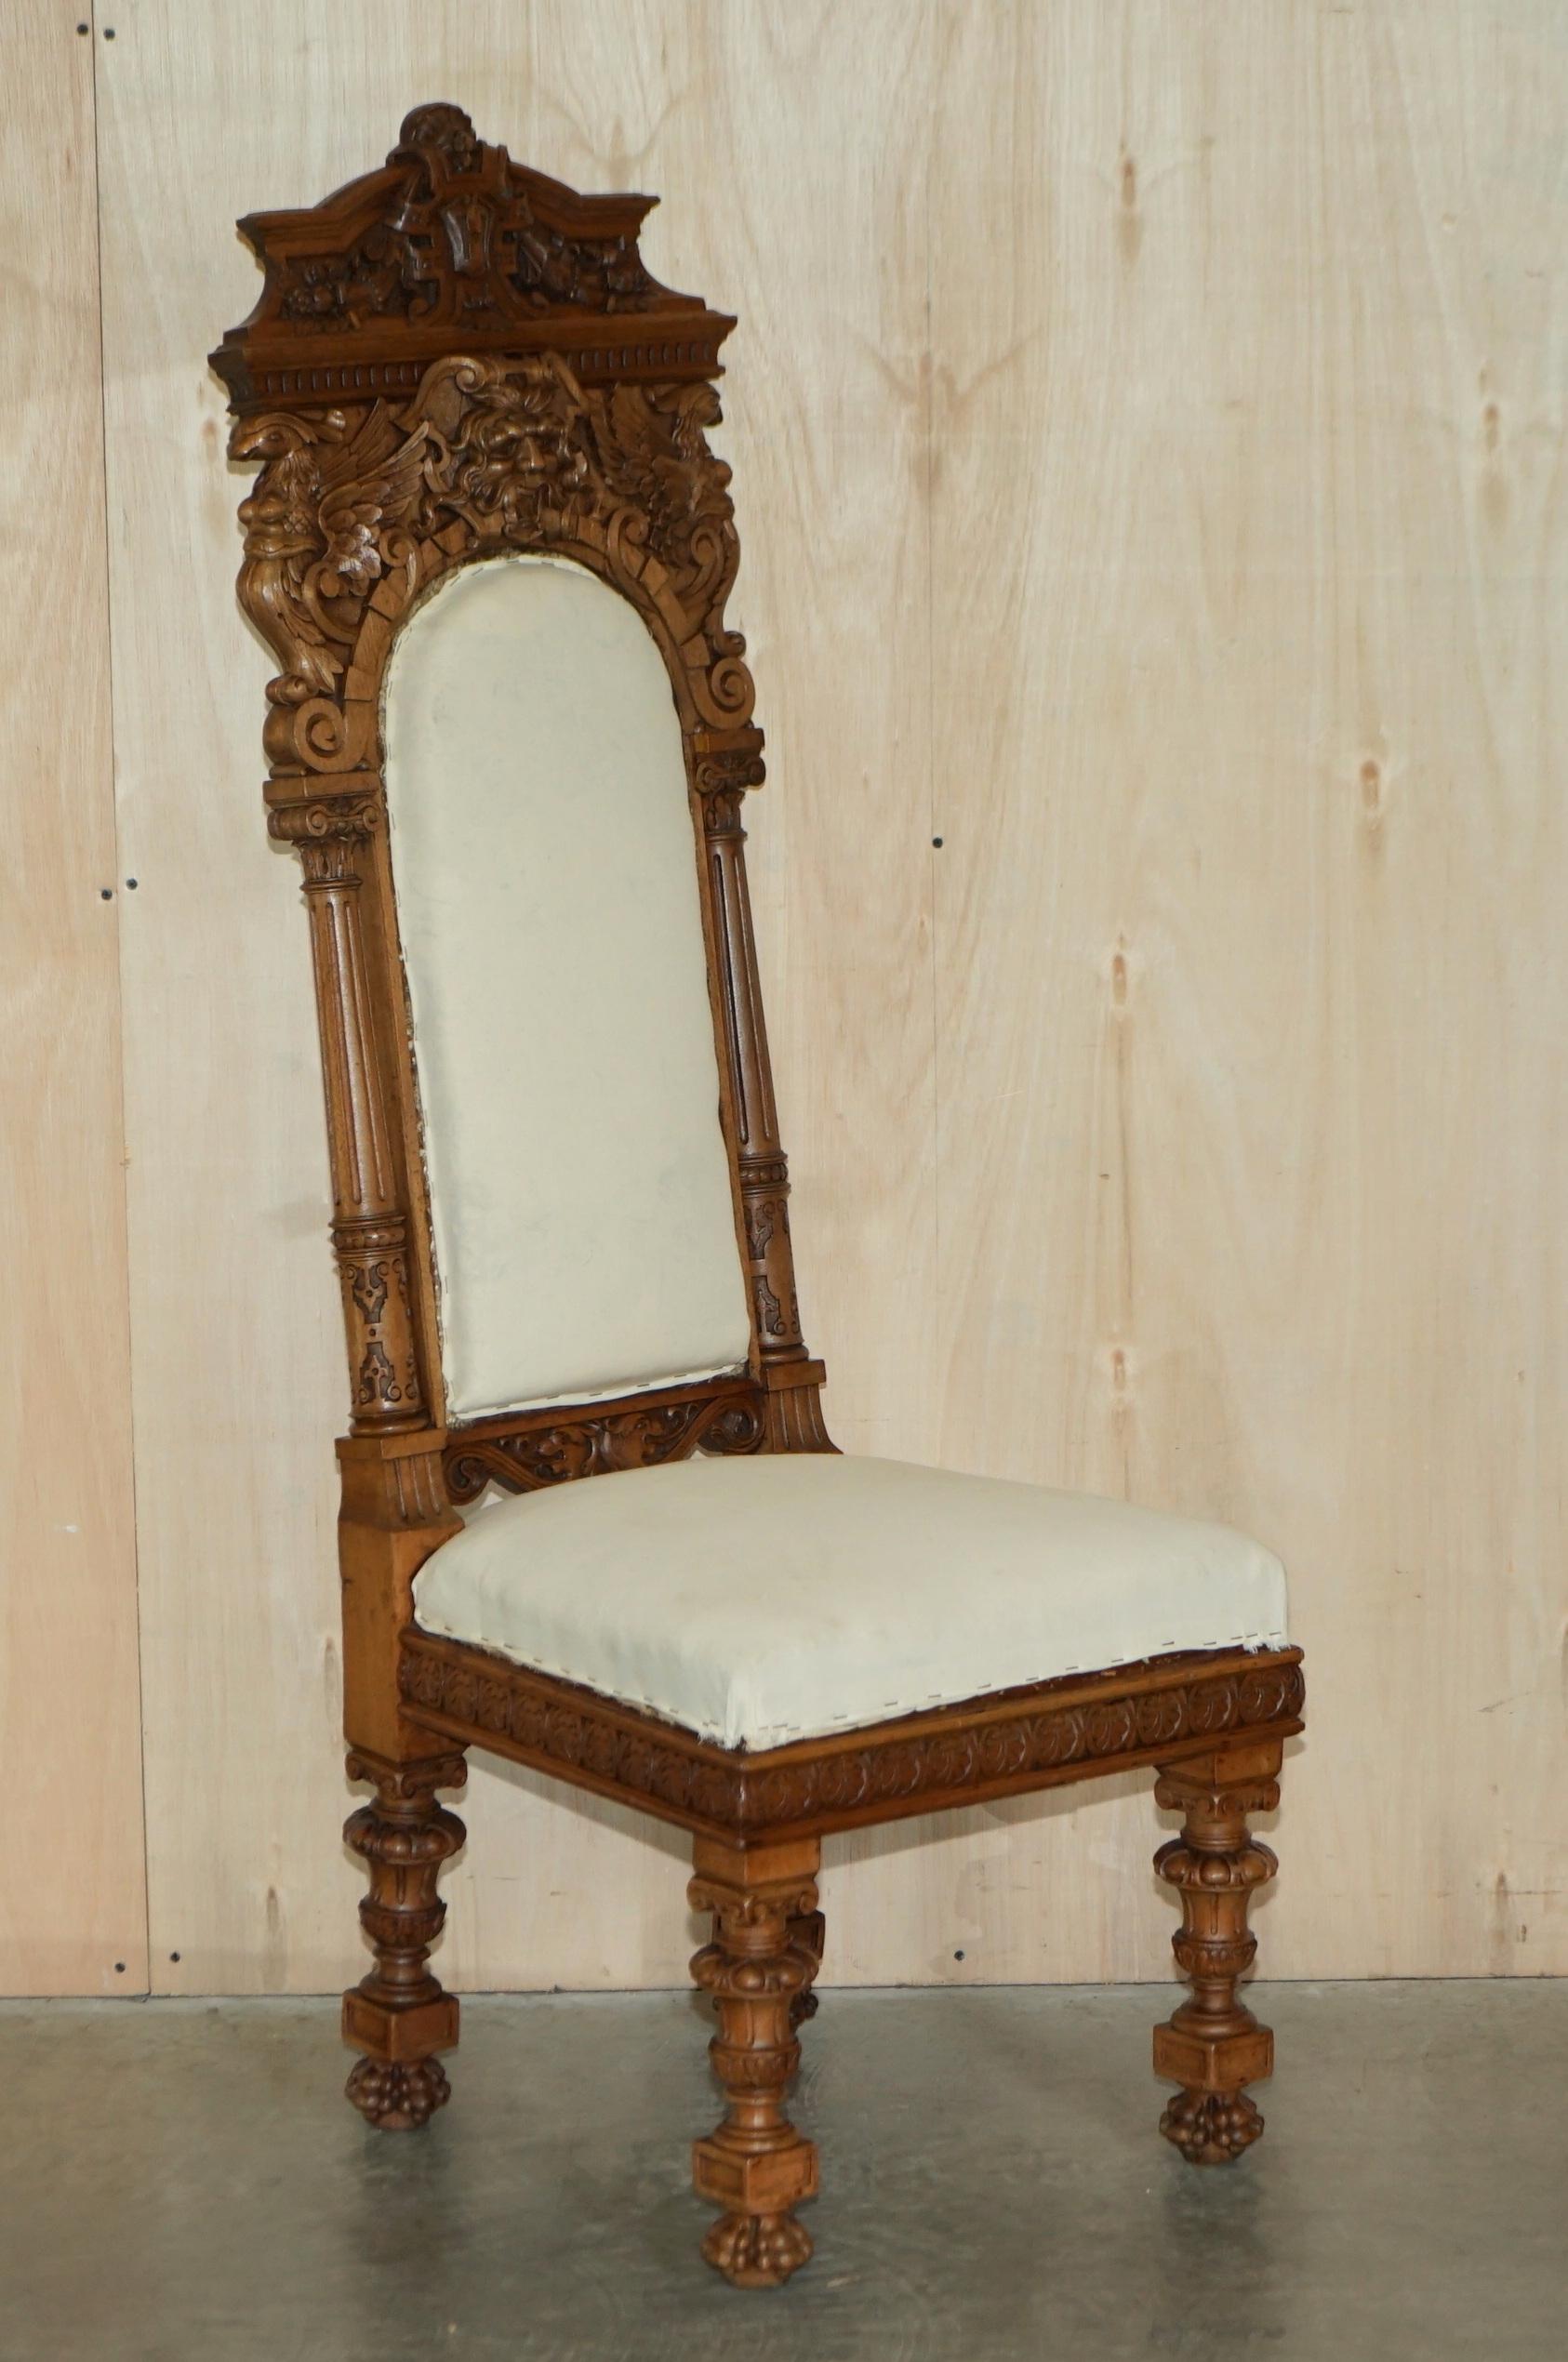 Pair of Ornate Carved Antique Italian Throne Chairs with Griffins / Dragons For Sale 13